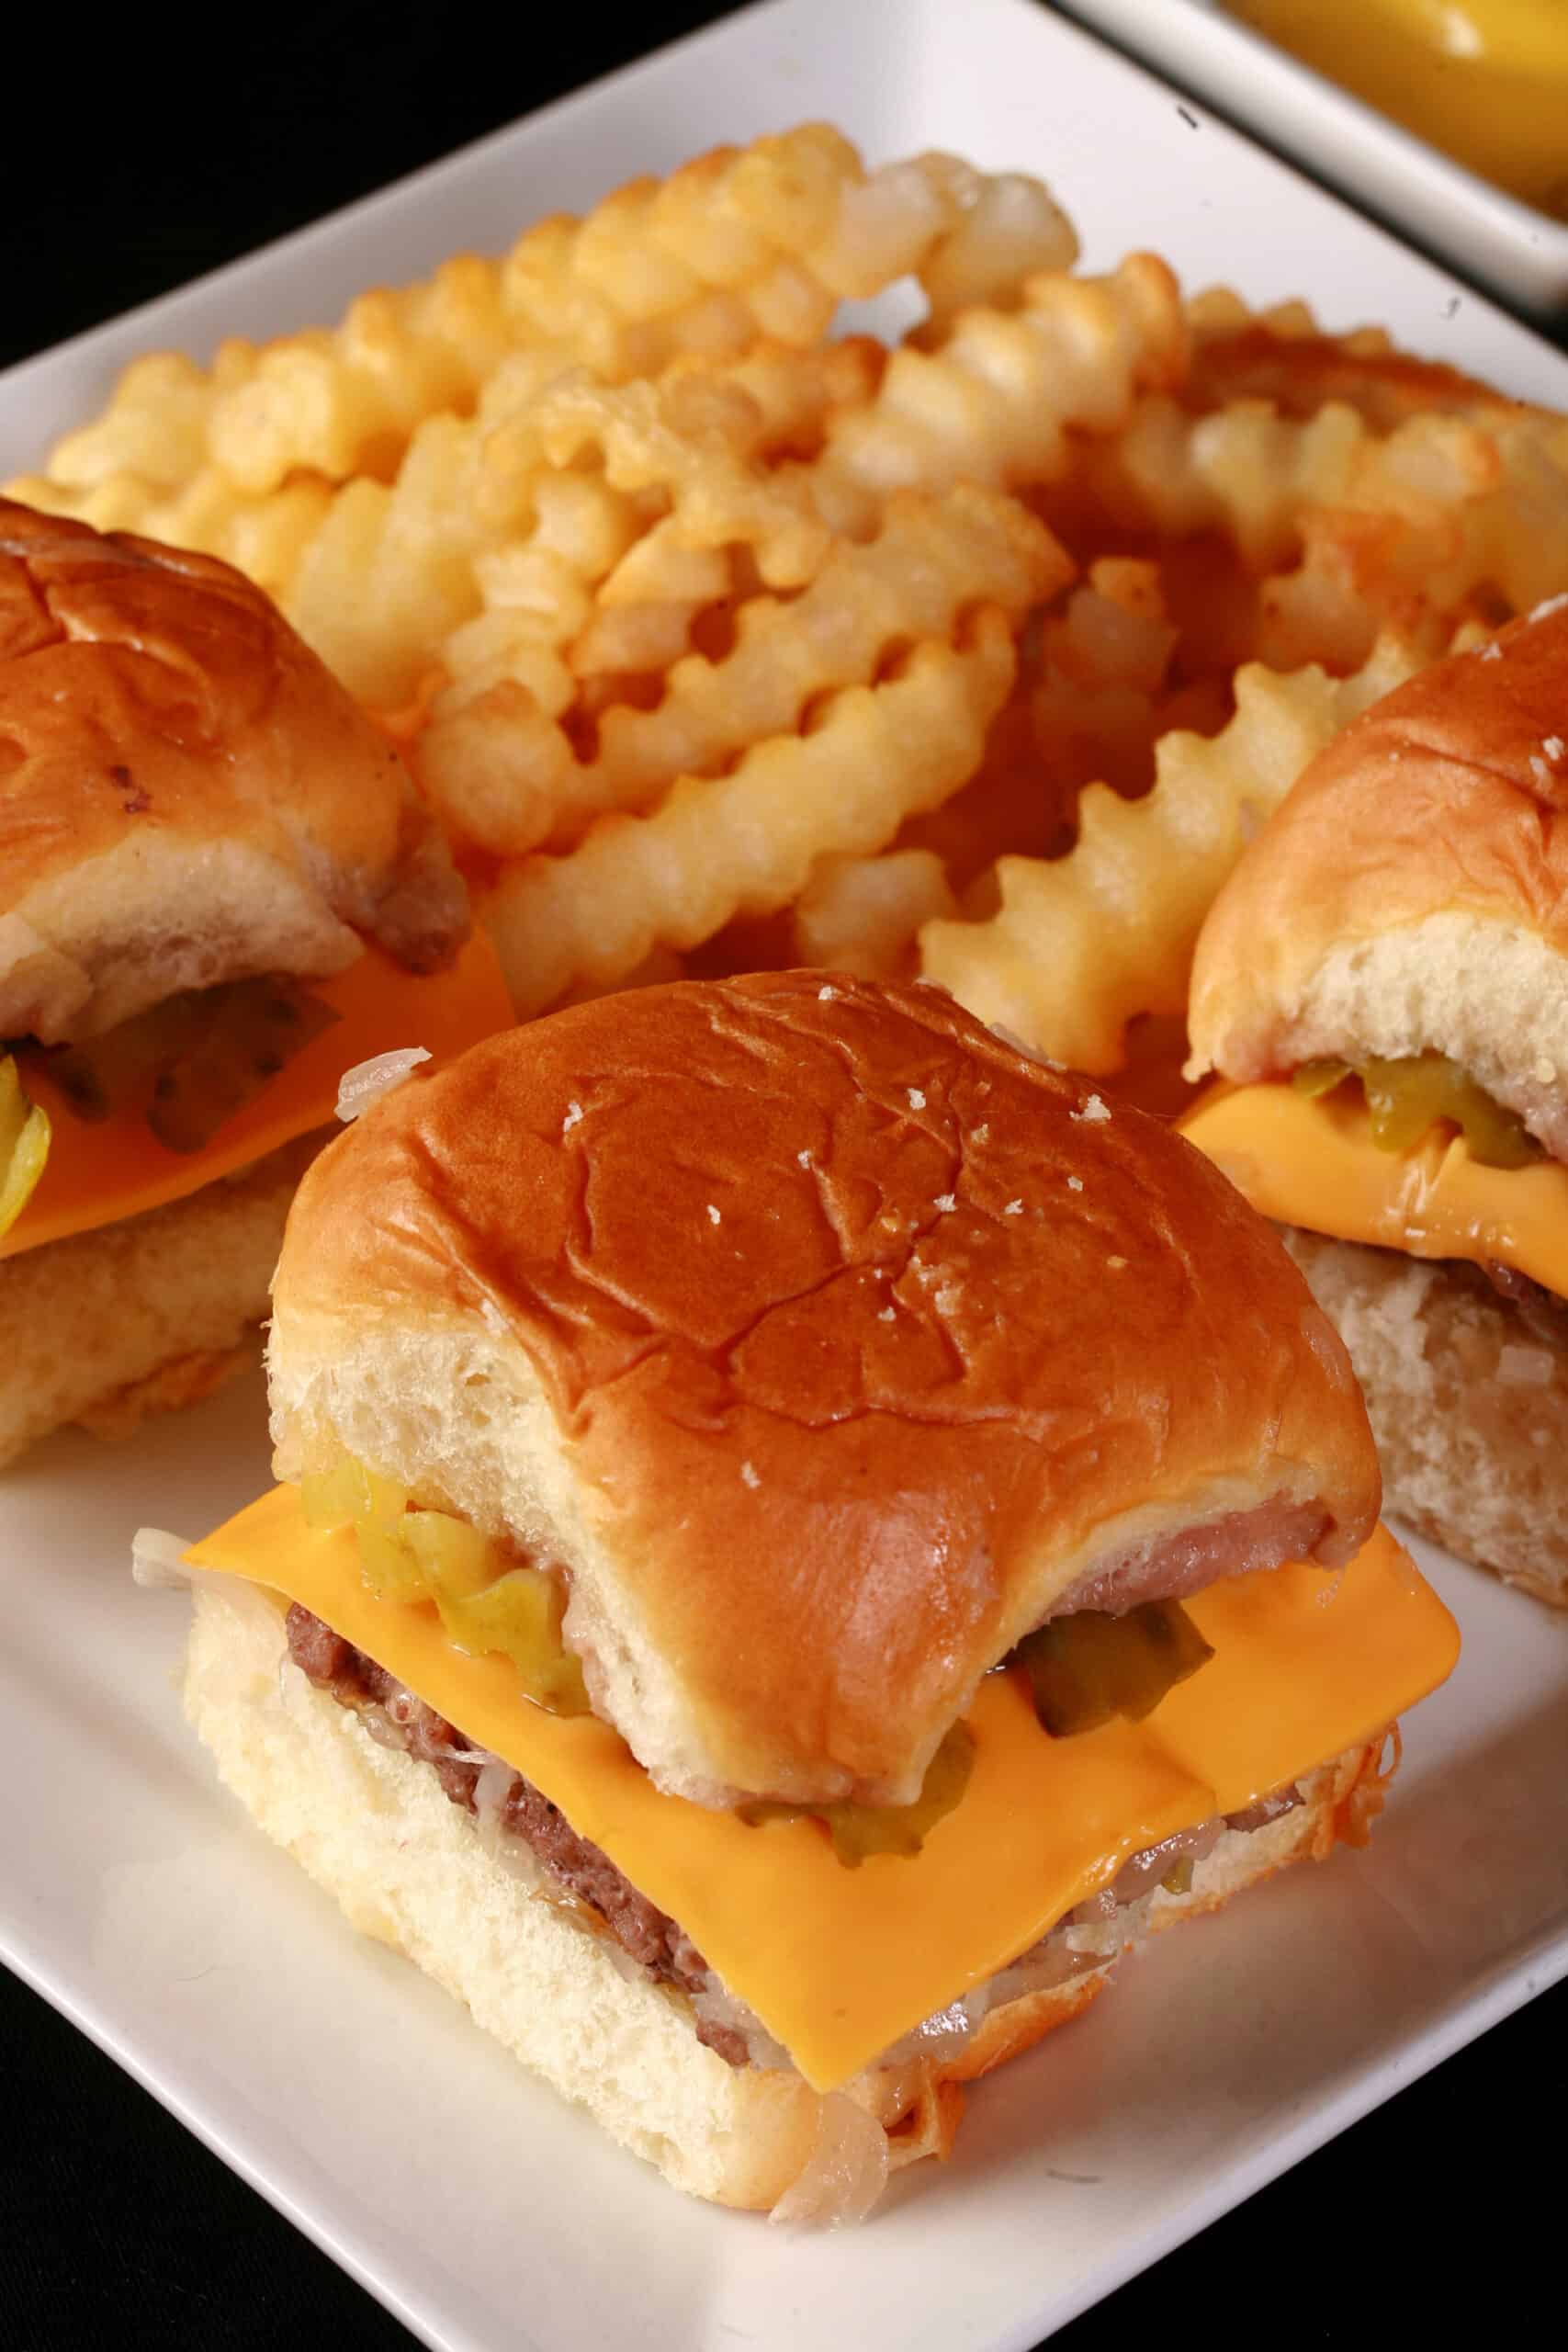 A plate of 3 copycat white castle burgers on a plate with crinkle cut fries.